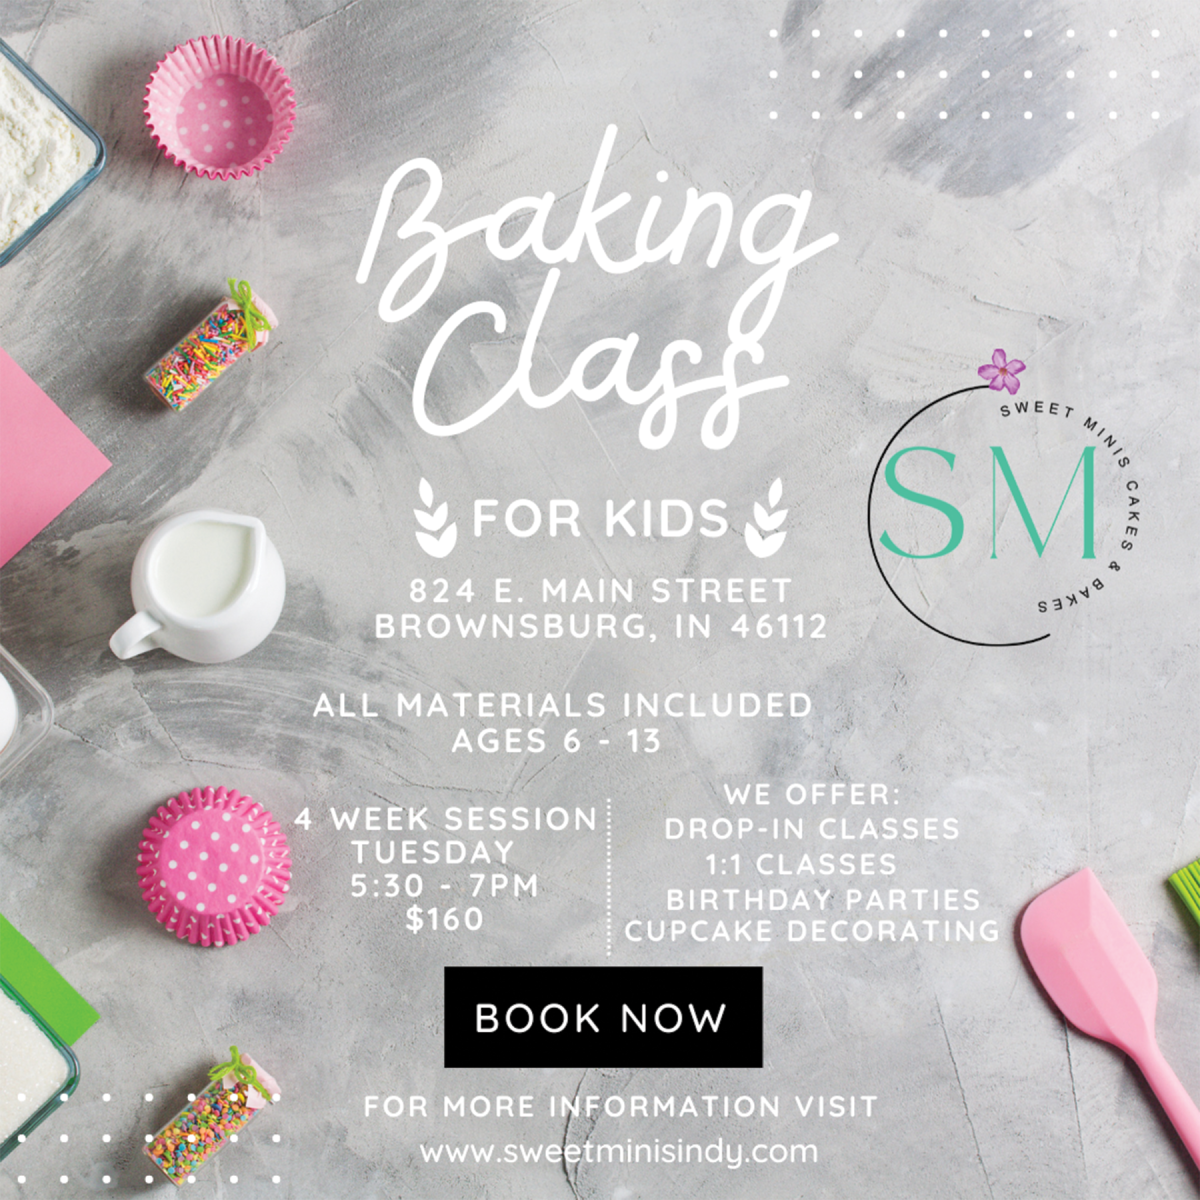 2022 Holiday Gift Guide: Sweet Mini's Baking Classes